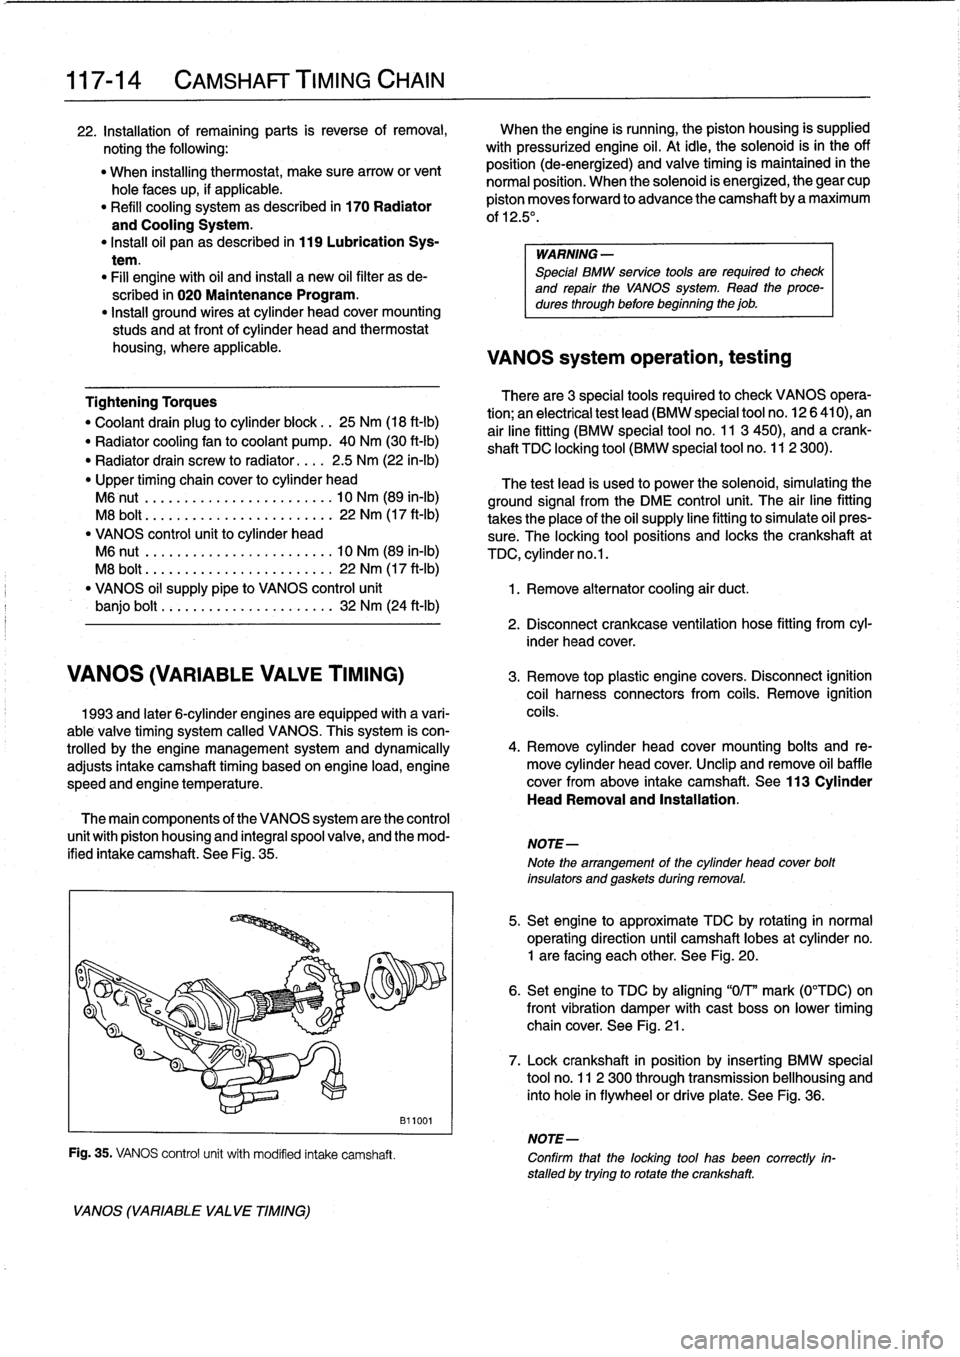 BMW 328i 1998 E36 Workshop Manual 
117-
1
4

	

CAMSHAFT
TIMING
CHAIN

22
.
Installation
of
remaining
parts
is
reverse
of
removal,

	

When
theengine
is
running,
the
piston
housing
is
supplied

noting
the
following
:

	

with
pressuri